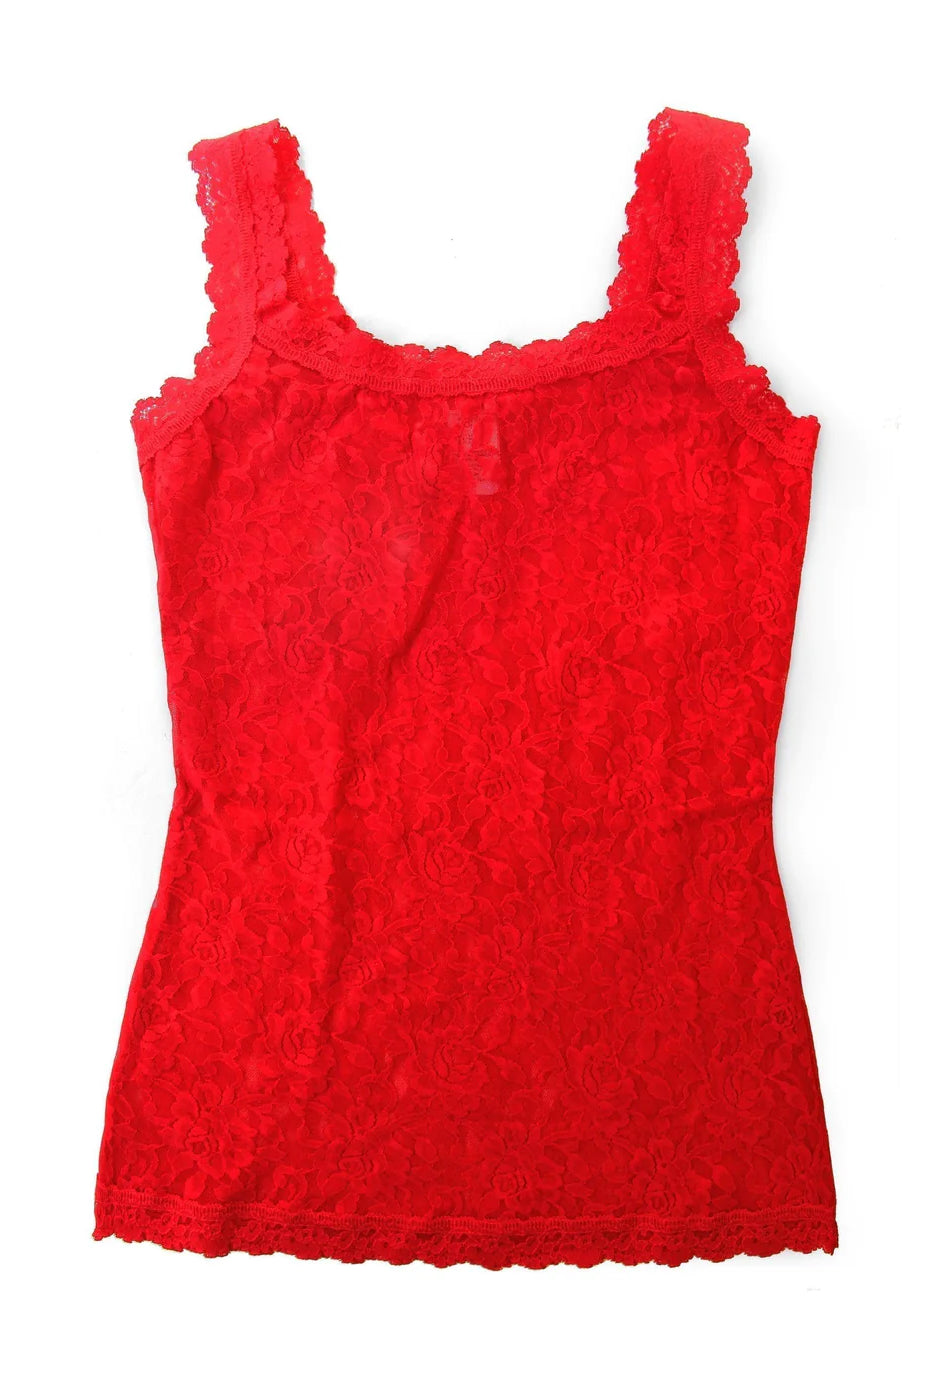 Signature Lace Classic Cami - Red - Flirt! Luxe Lingerie & Sleepwear